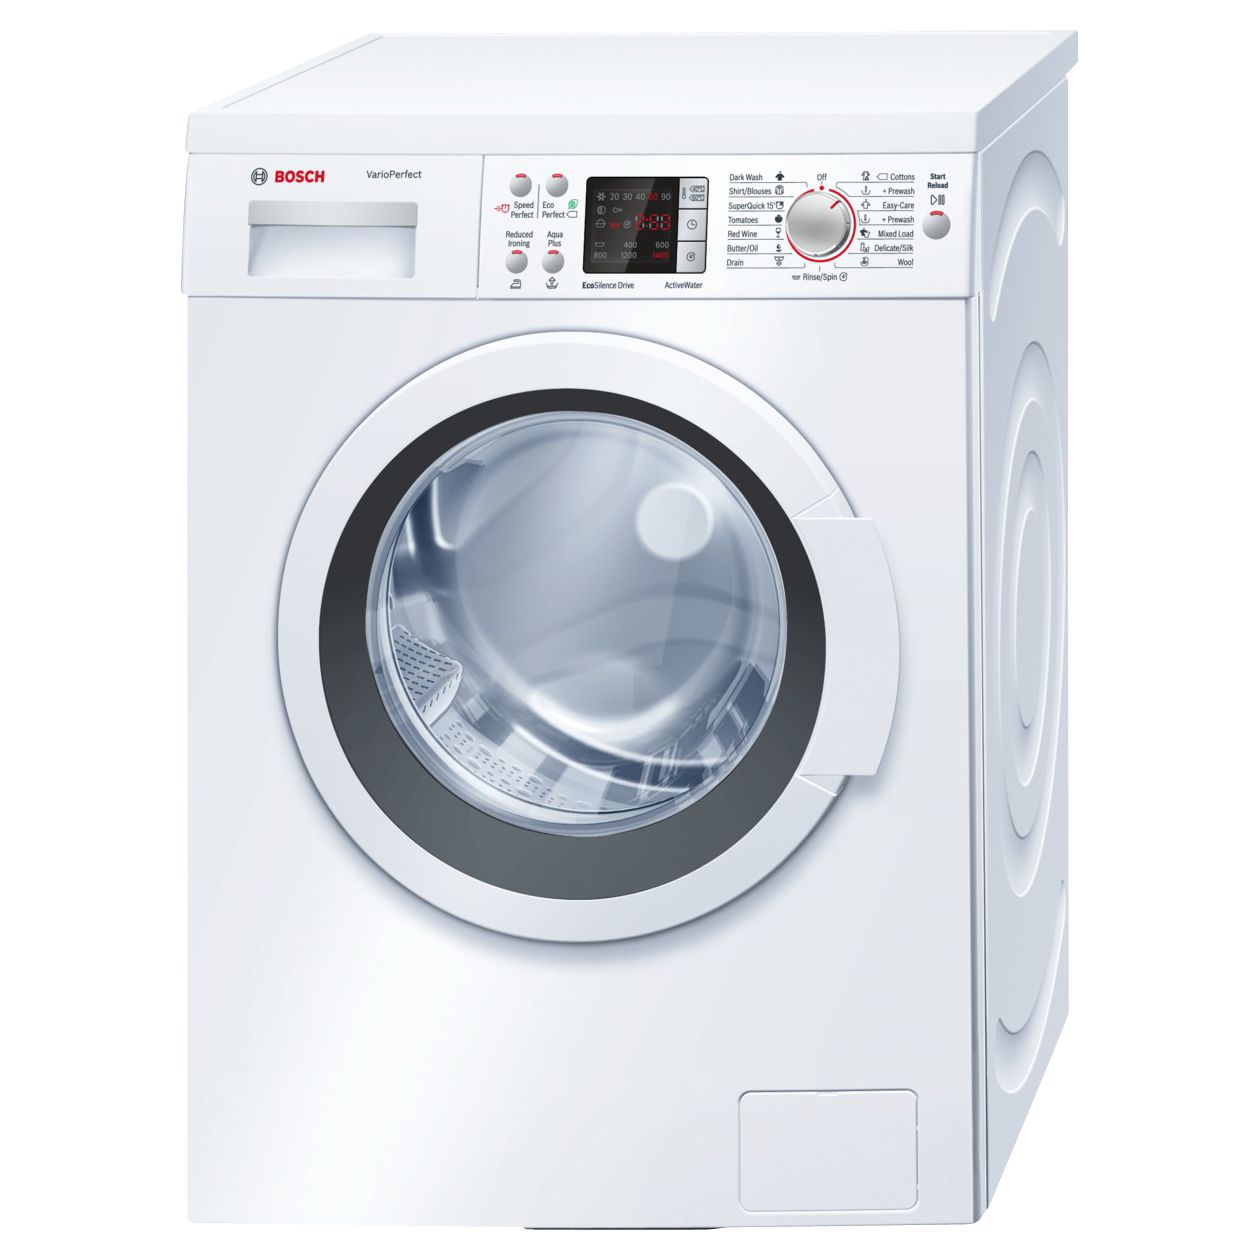 Bosch WAQ284S0GB Freestanding Washing Machine, 8kg Load, A+++ Energy Rating, 1400rpm Spin, White ...